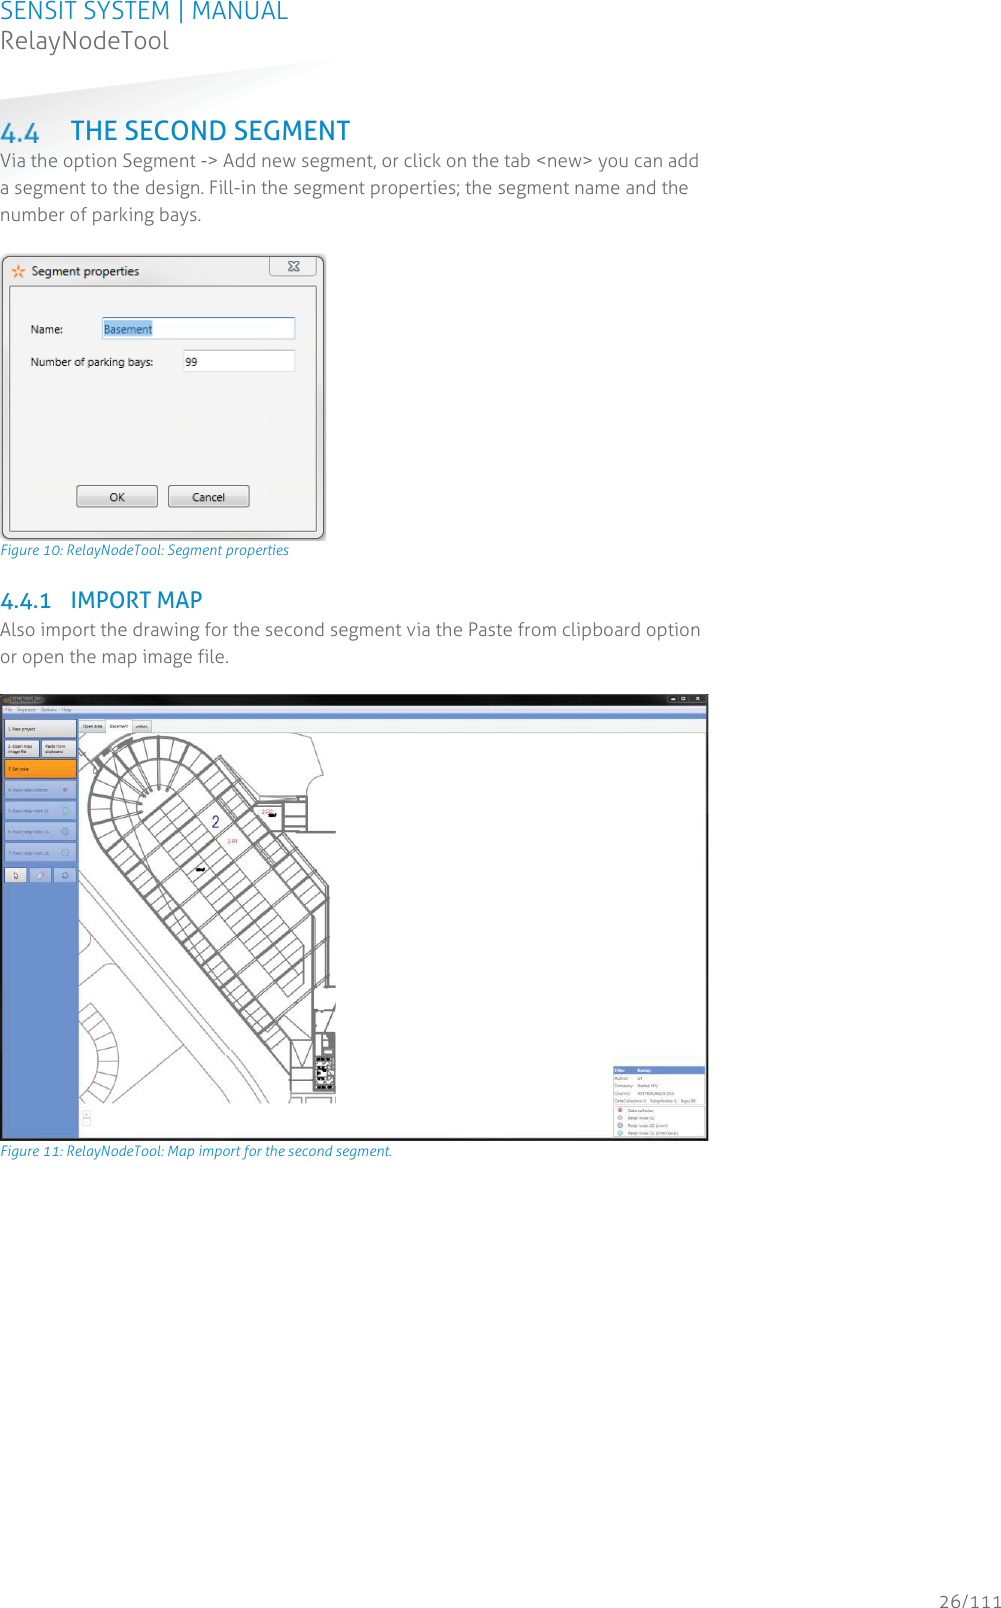 SENSIT SYSTEM | MANUAL RelayNodeTool  26/111 RelayNodeTool THE SECOND SEGMENT Via the option Segment -&gt; Add new segment, or click on the tab &lt;new&gt; you can add a segment to the design. Fill-in the segment properties; the segment name and the number of parking bays.   Figure 10: RelayNodeTool: Segment properties 4.4.1 IMPORT MAP Also import the drawing for the second segment via the Paste from clipboard option or open the map image file.   Figure 11: RelayNodeTool: Map import for the second segment.   